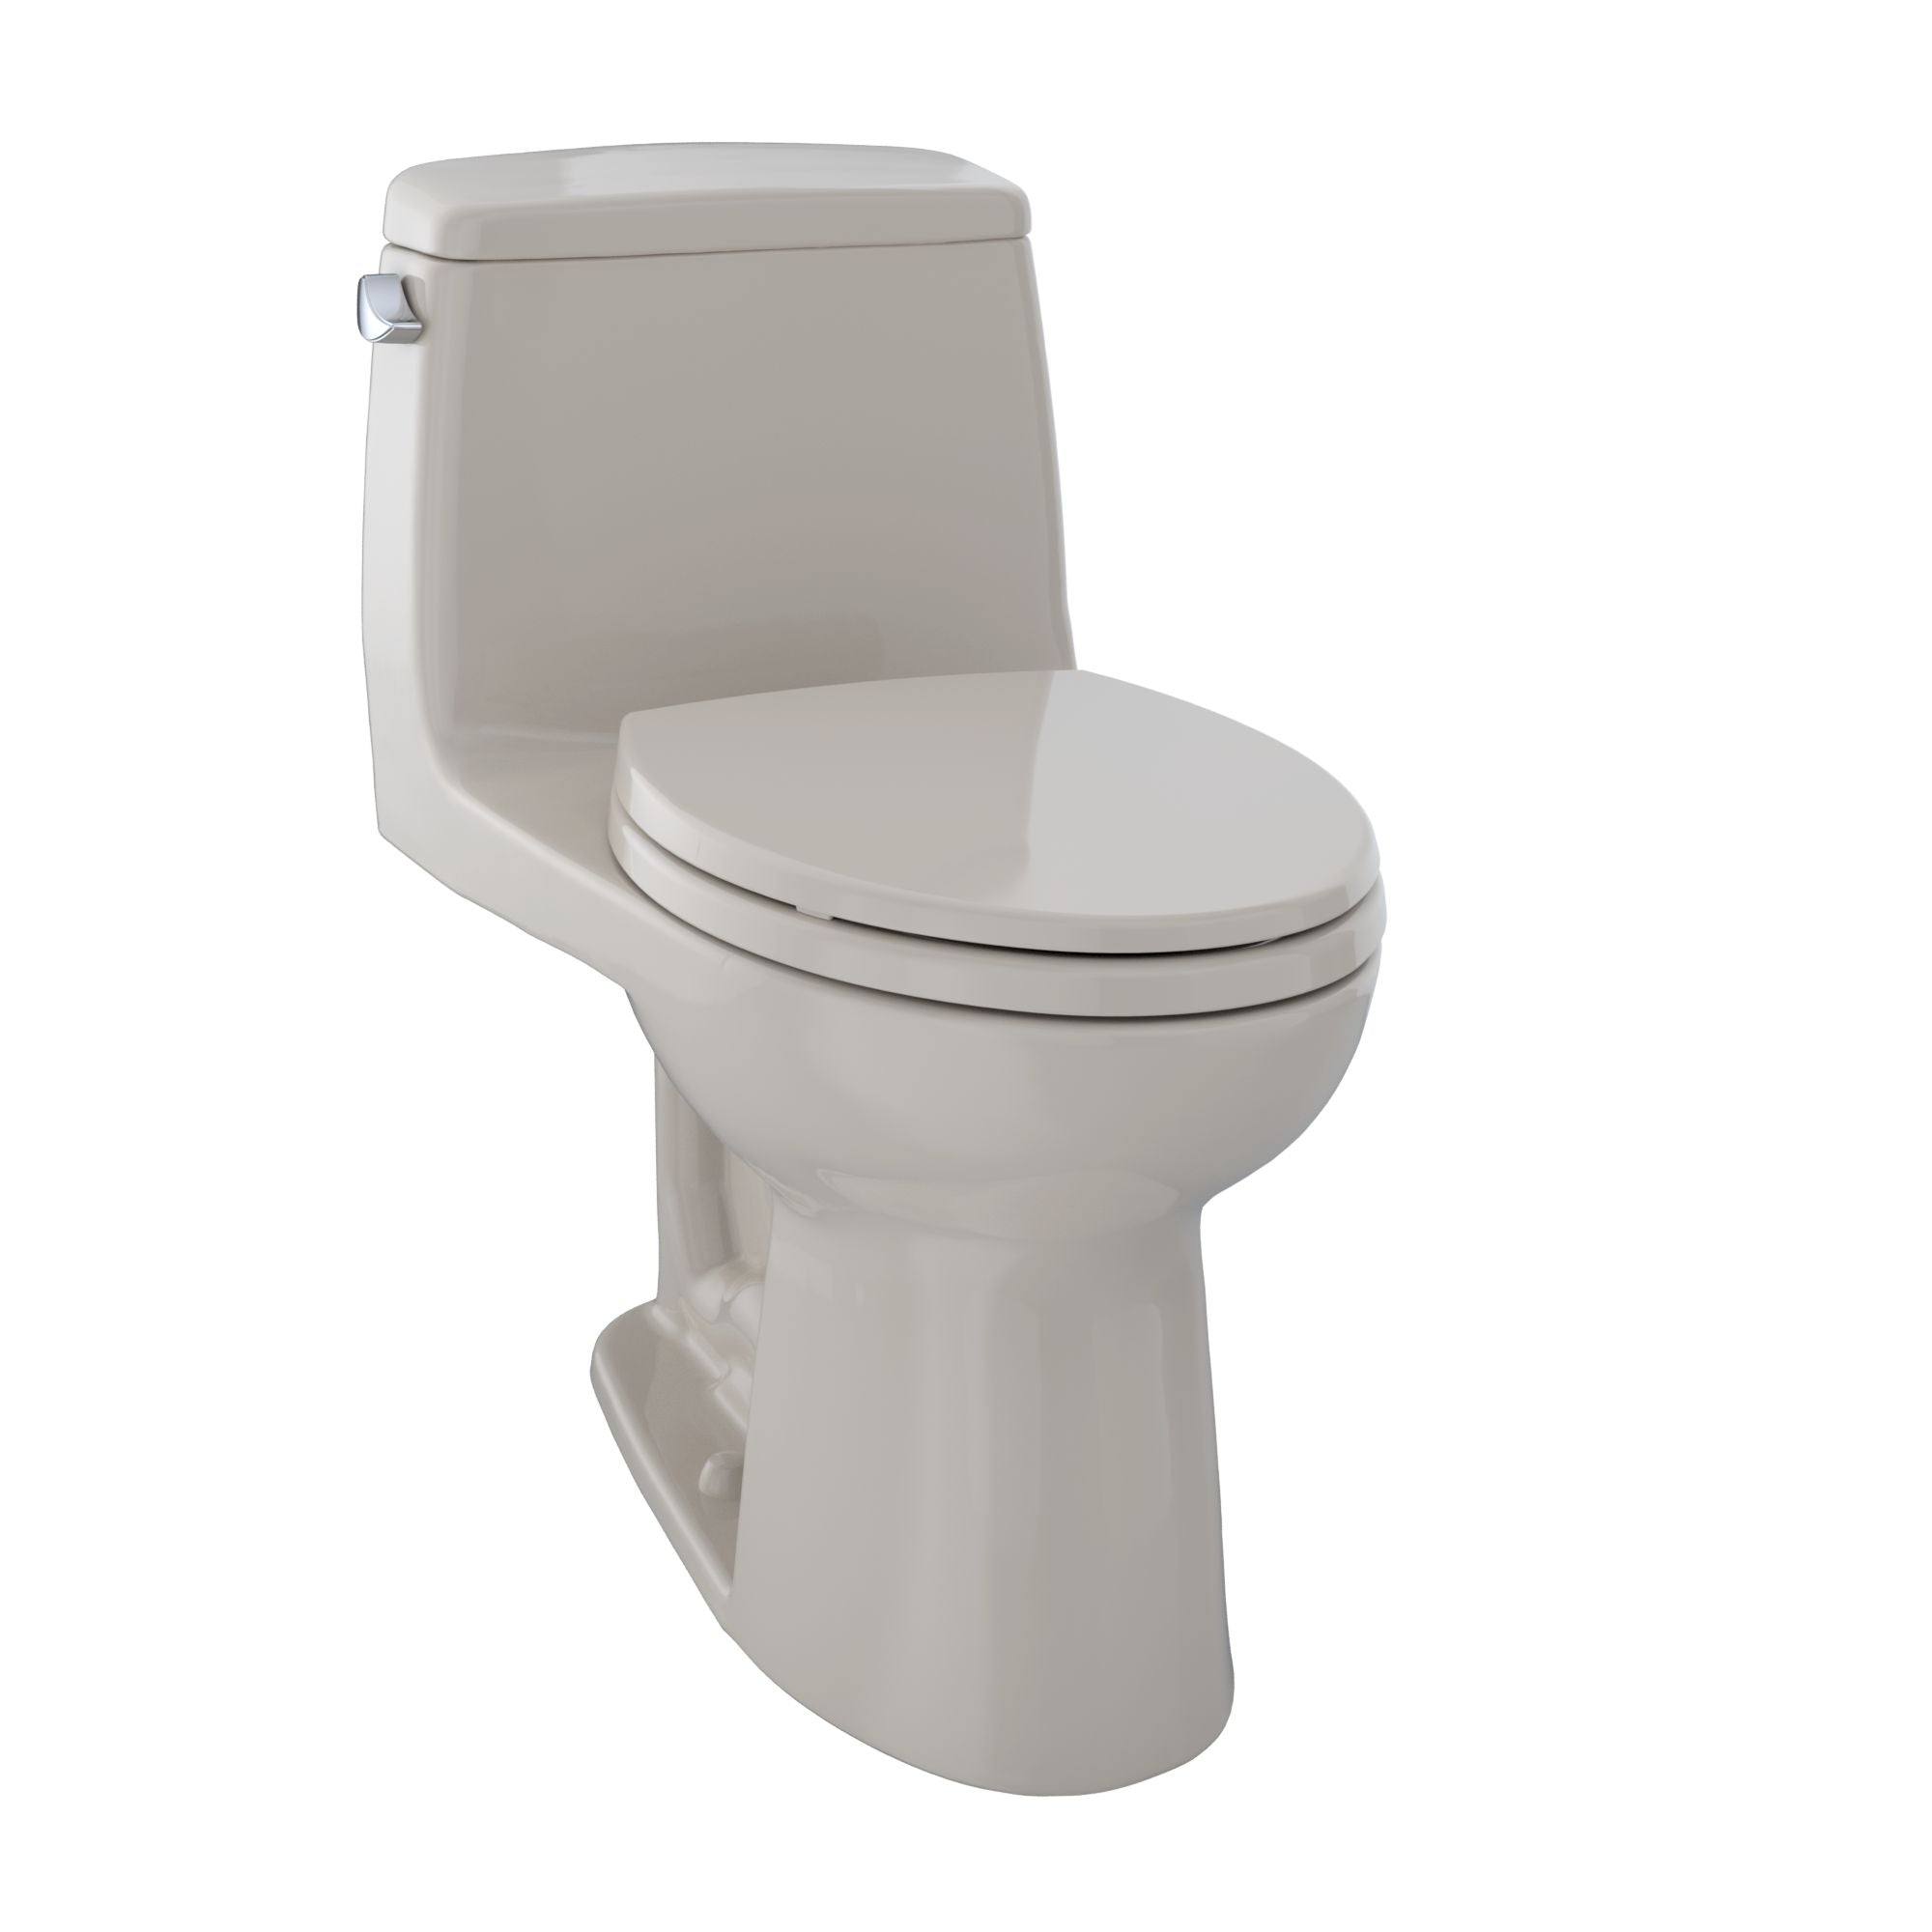 Toto Ultramax One-piece Toilet 1.6 GPF ADA Compliant Elongated Bowl